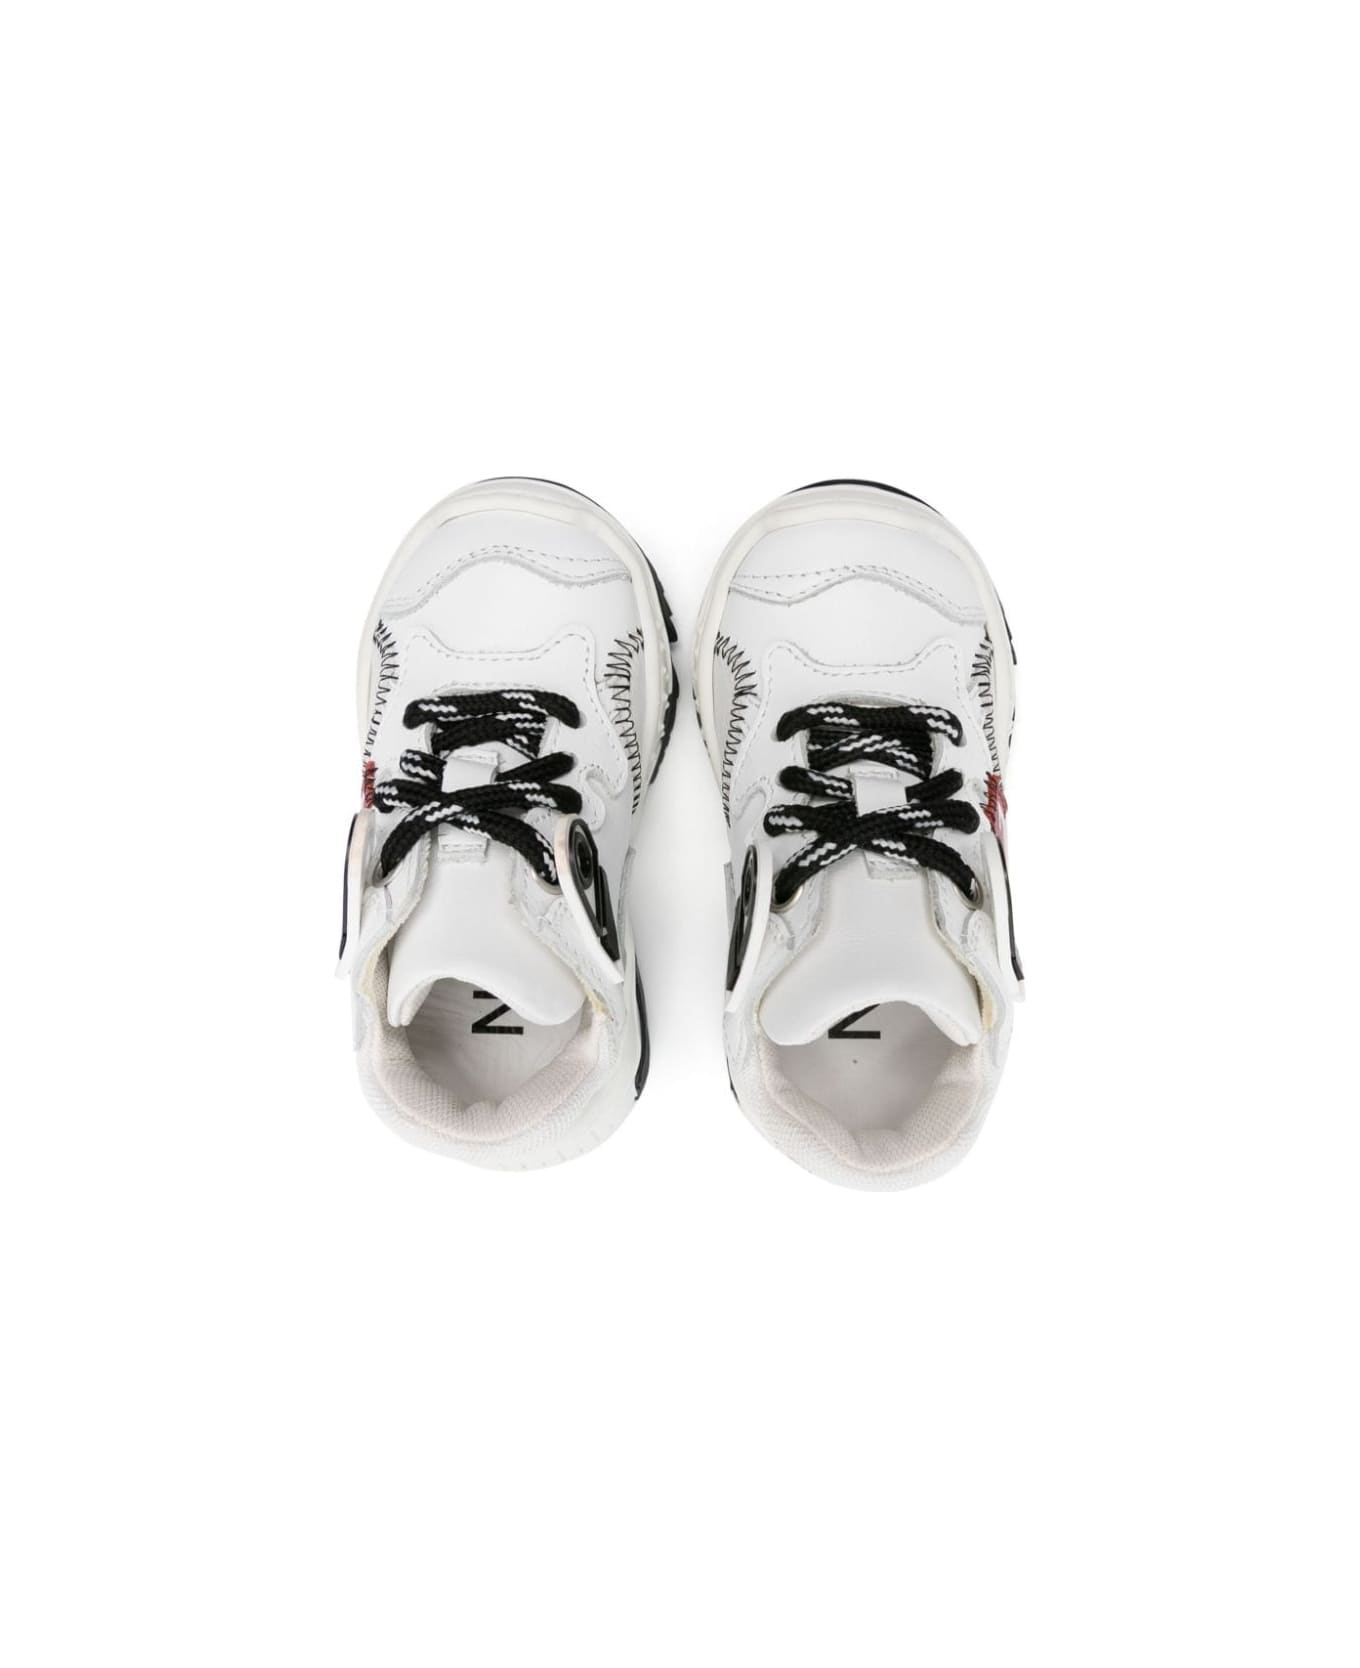 N.21 Chunky Sneakers With Print - White